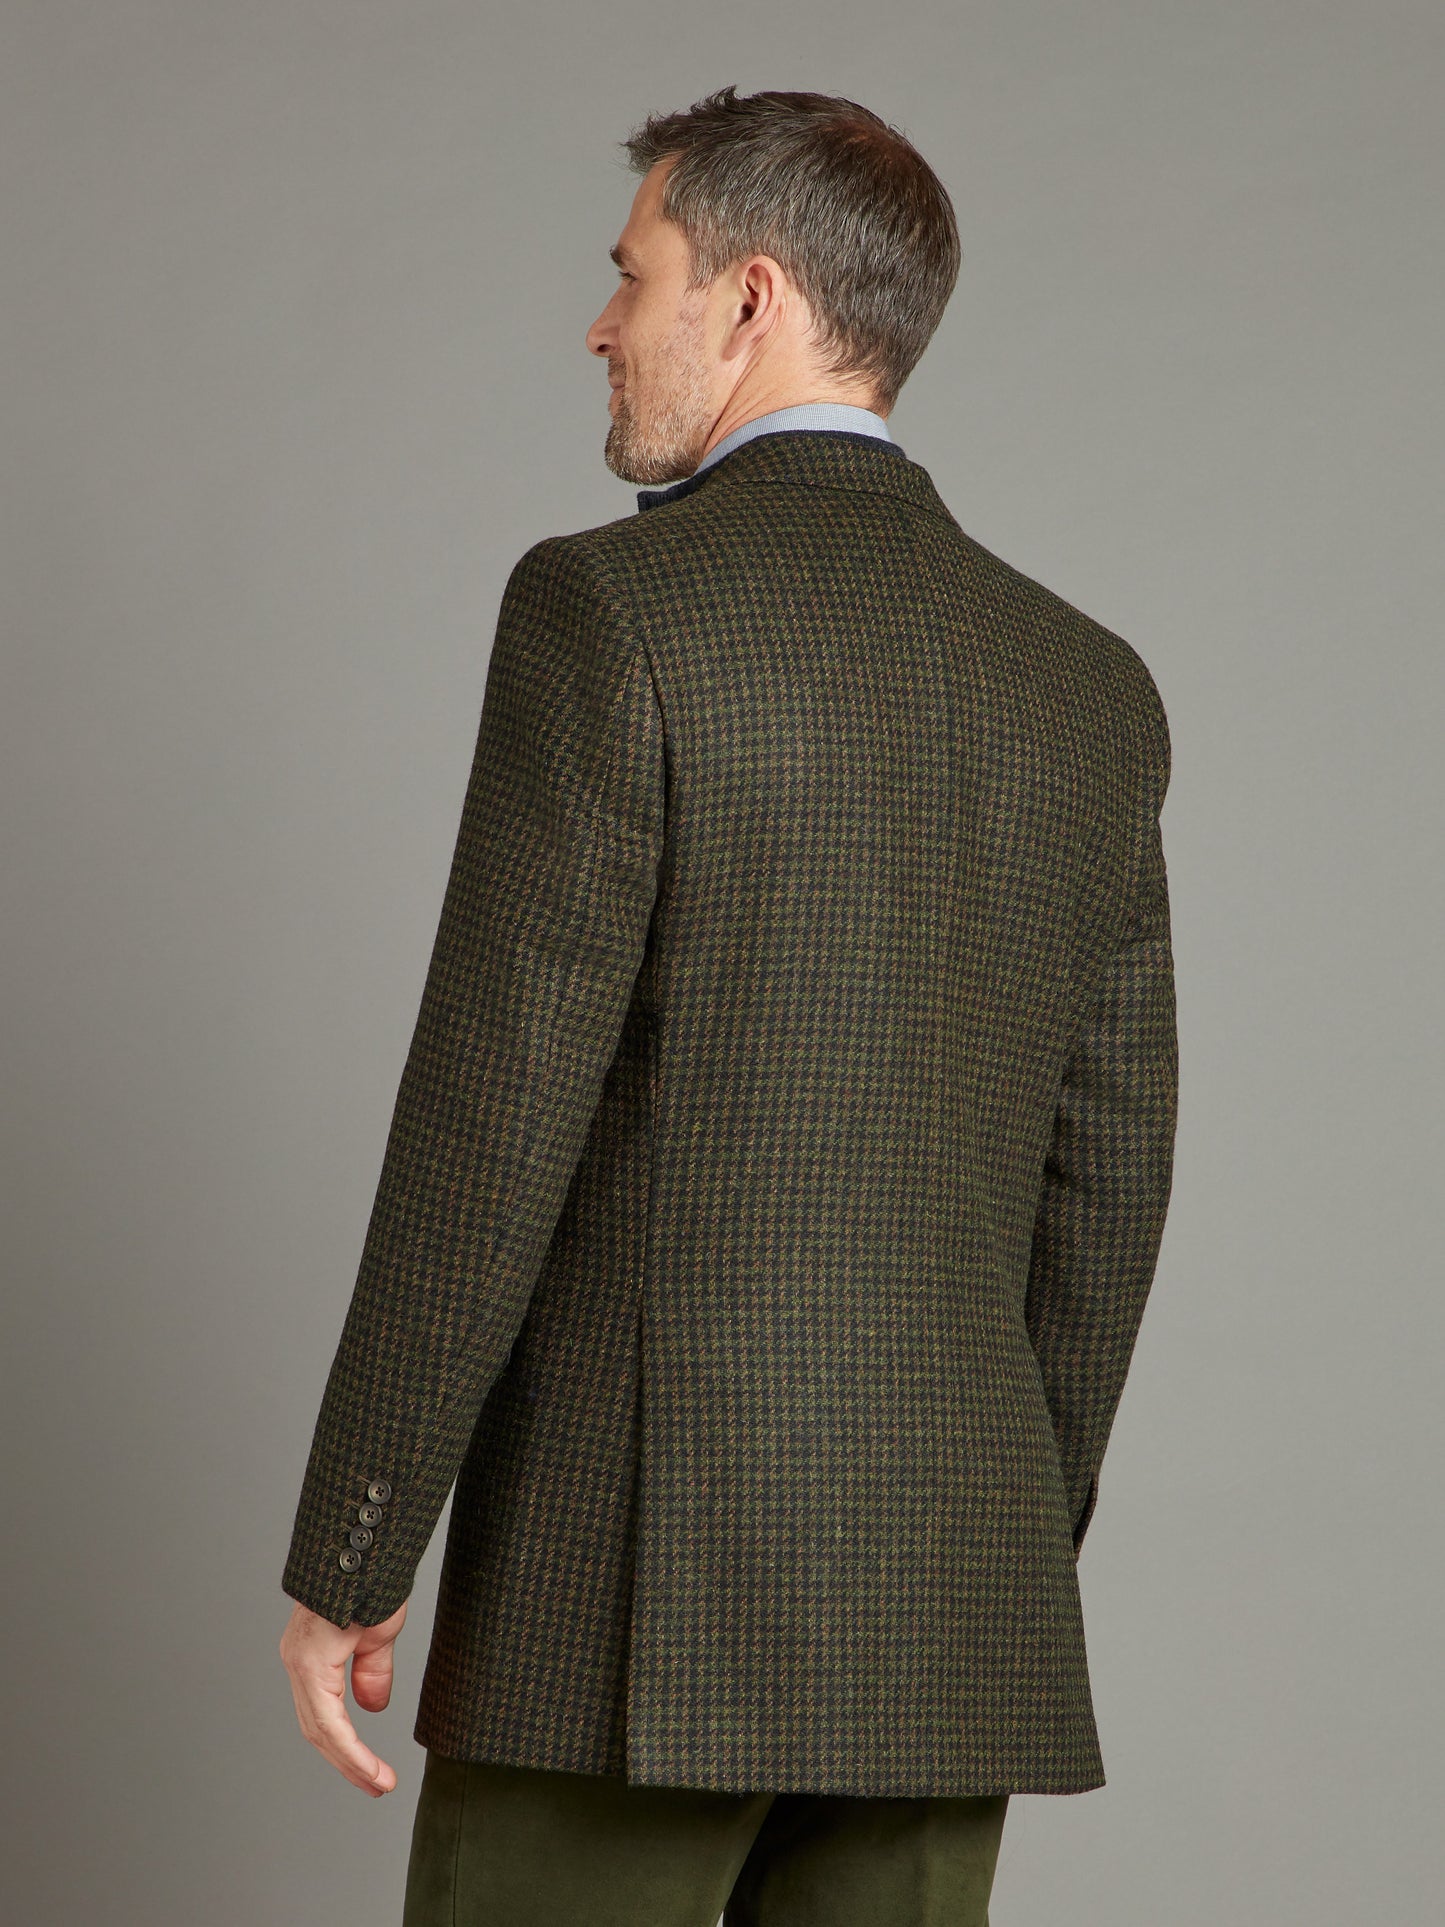 Eaton Jacket - Houndstooth Green/Brown